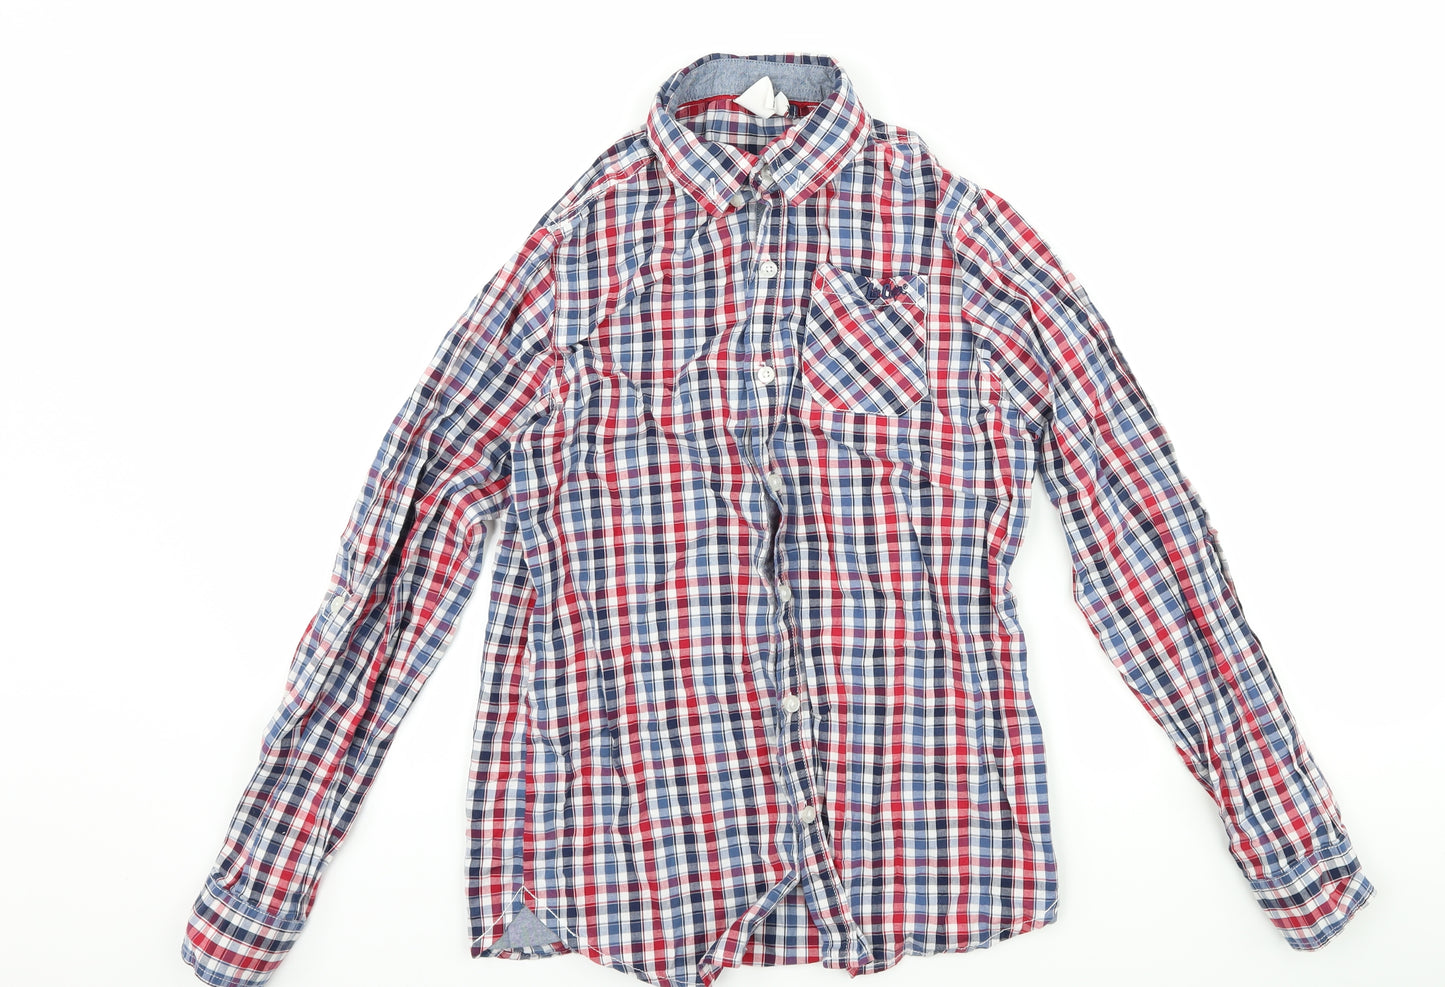 Lee Cooper Boys Blue Check  Basic Button-Up Size 13 Years